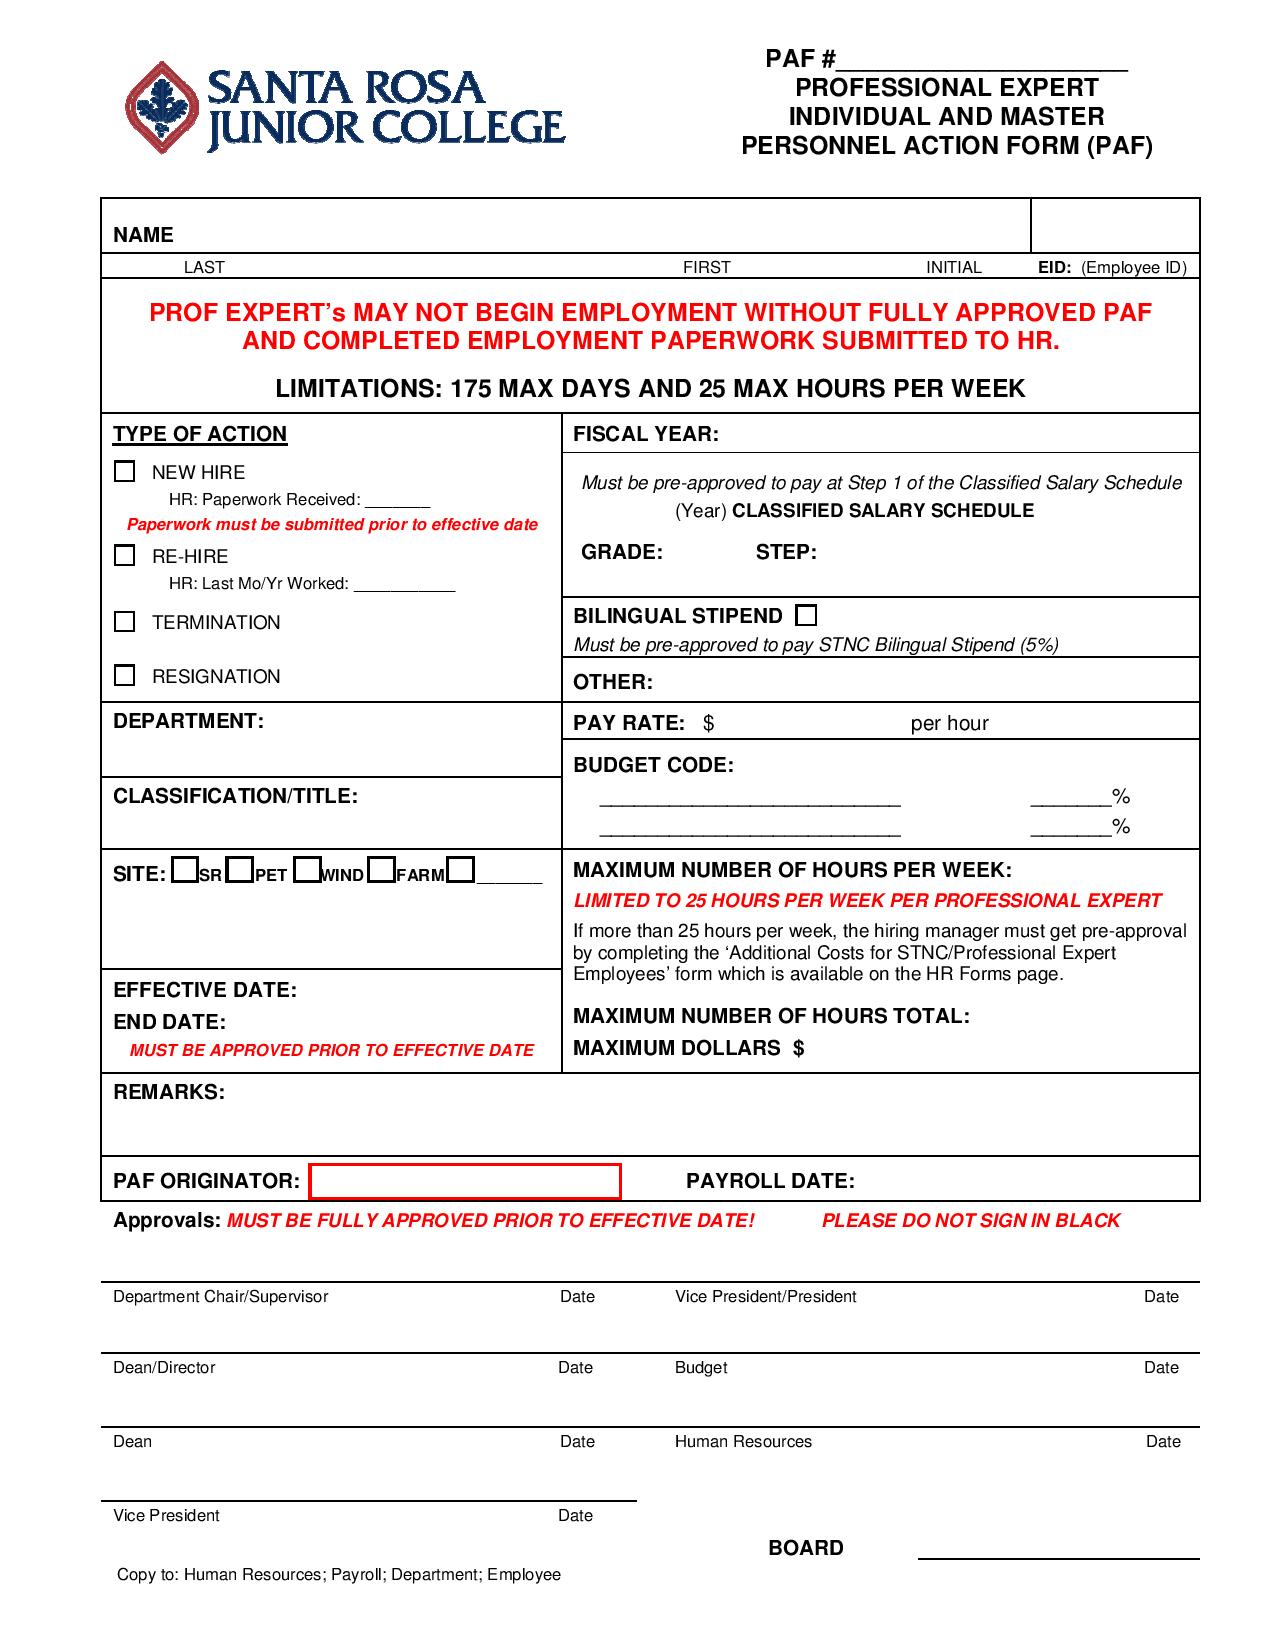 professional expert personnel action form page 001